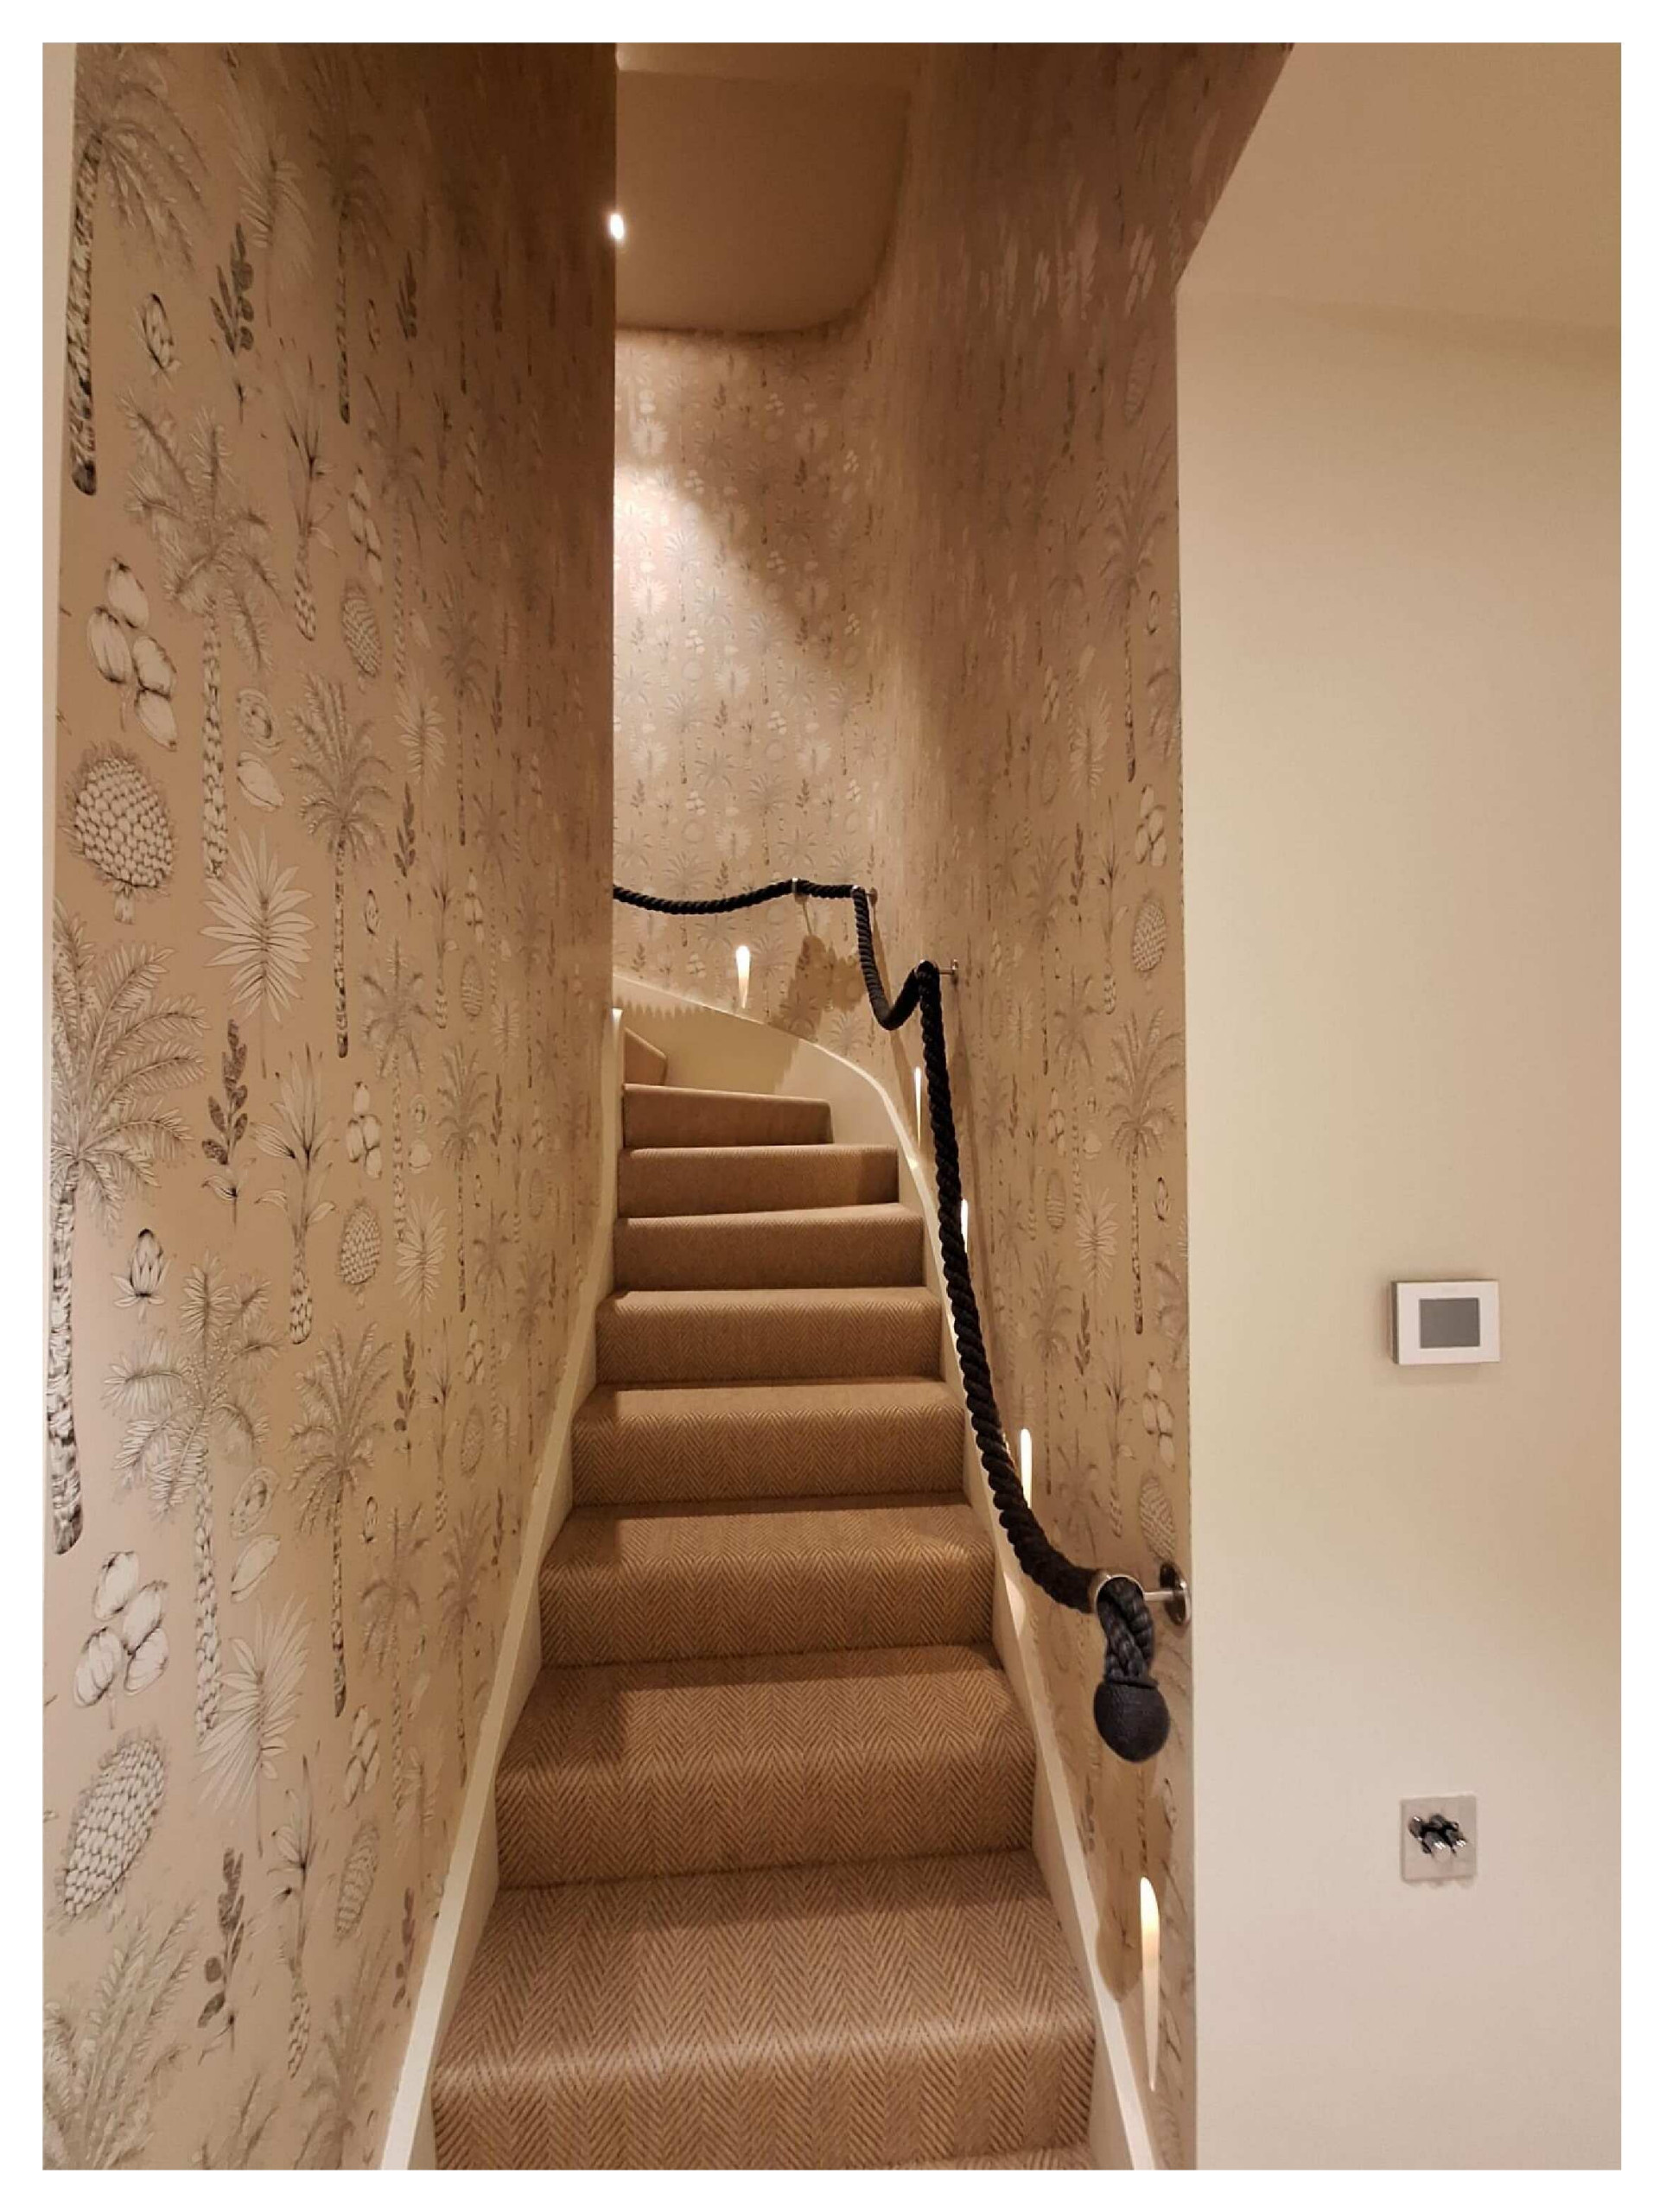 Wall Paper on staircase